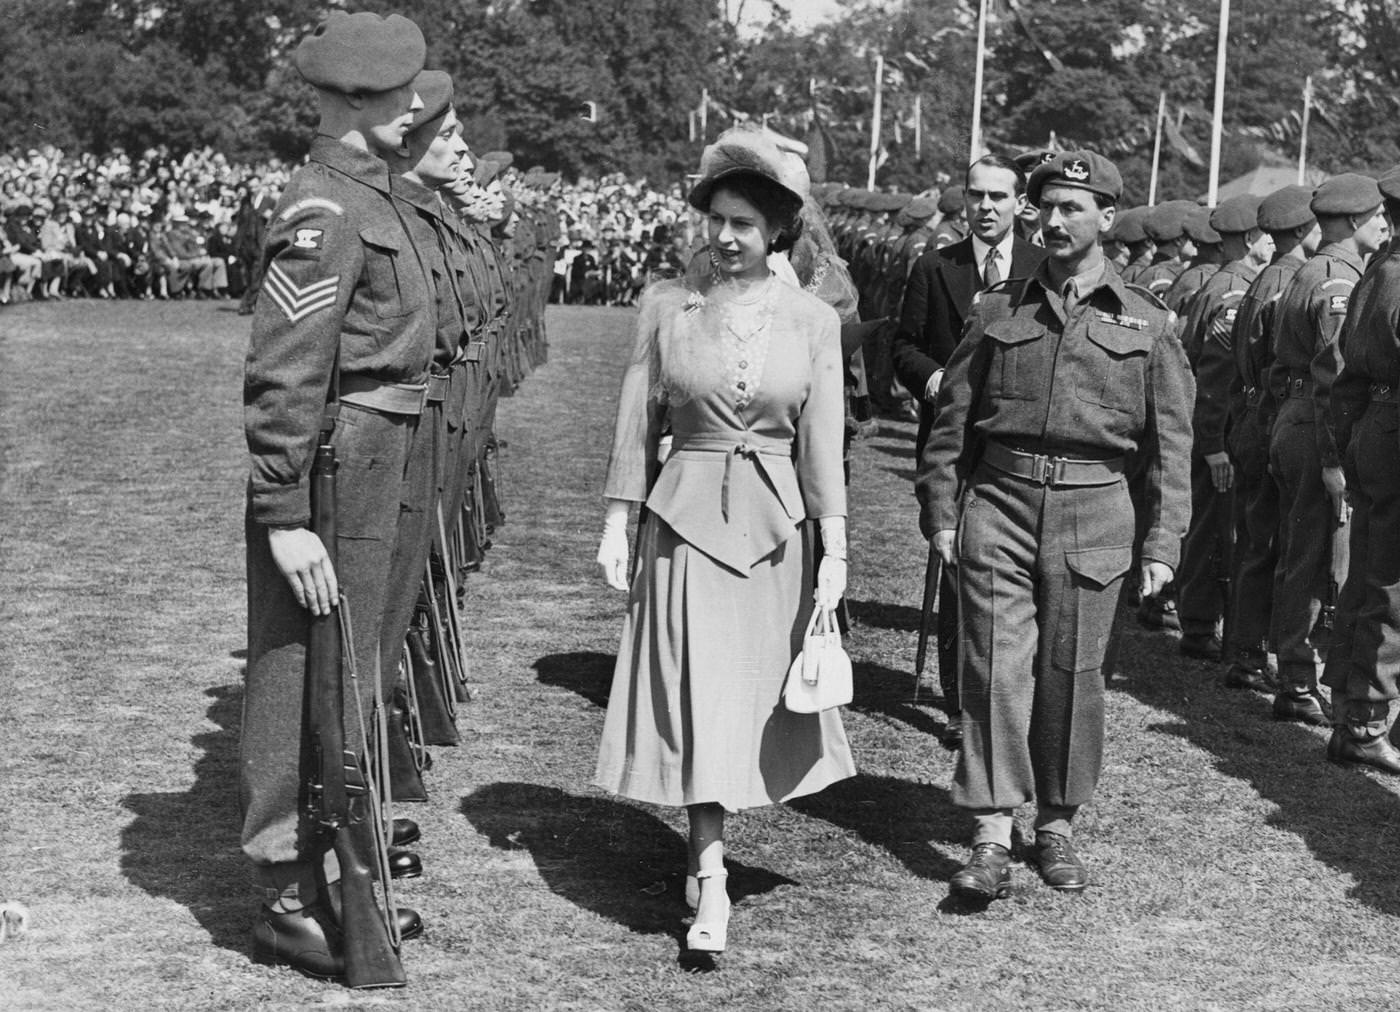 Princess Elizabeth inspects a Guard of Honor of the 7th Battalion, Royal Warwickshire Regiment at the War Memorial Park in Coventry, England, 22 May 1948.